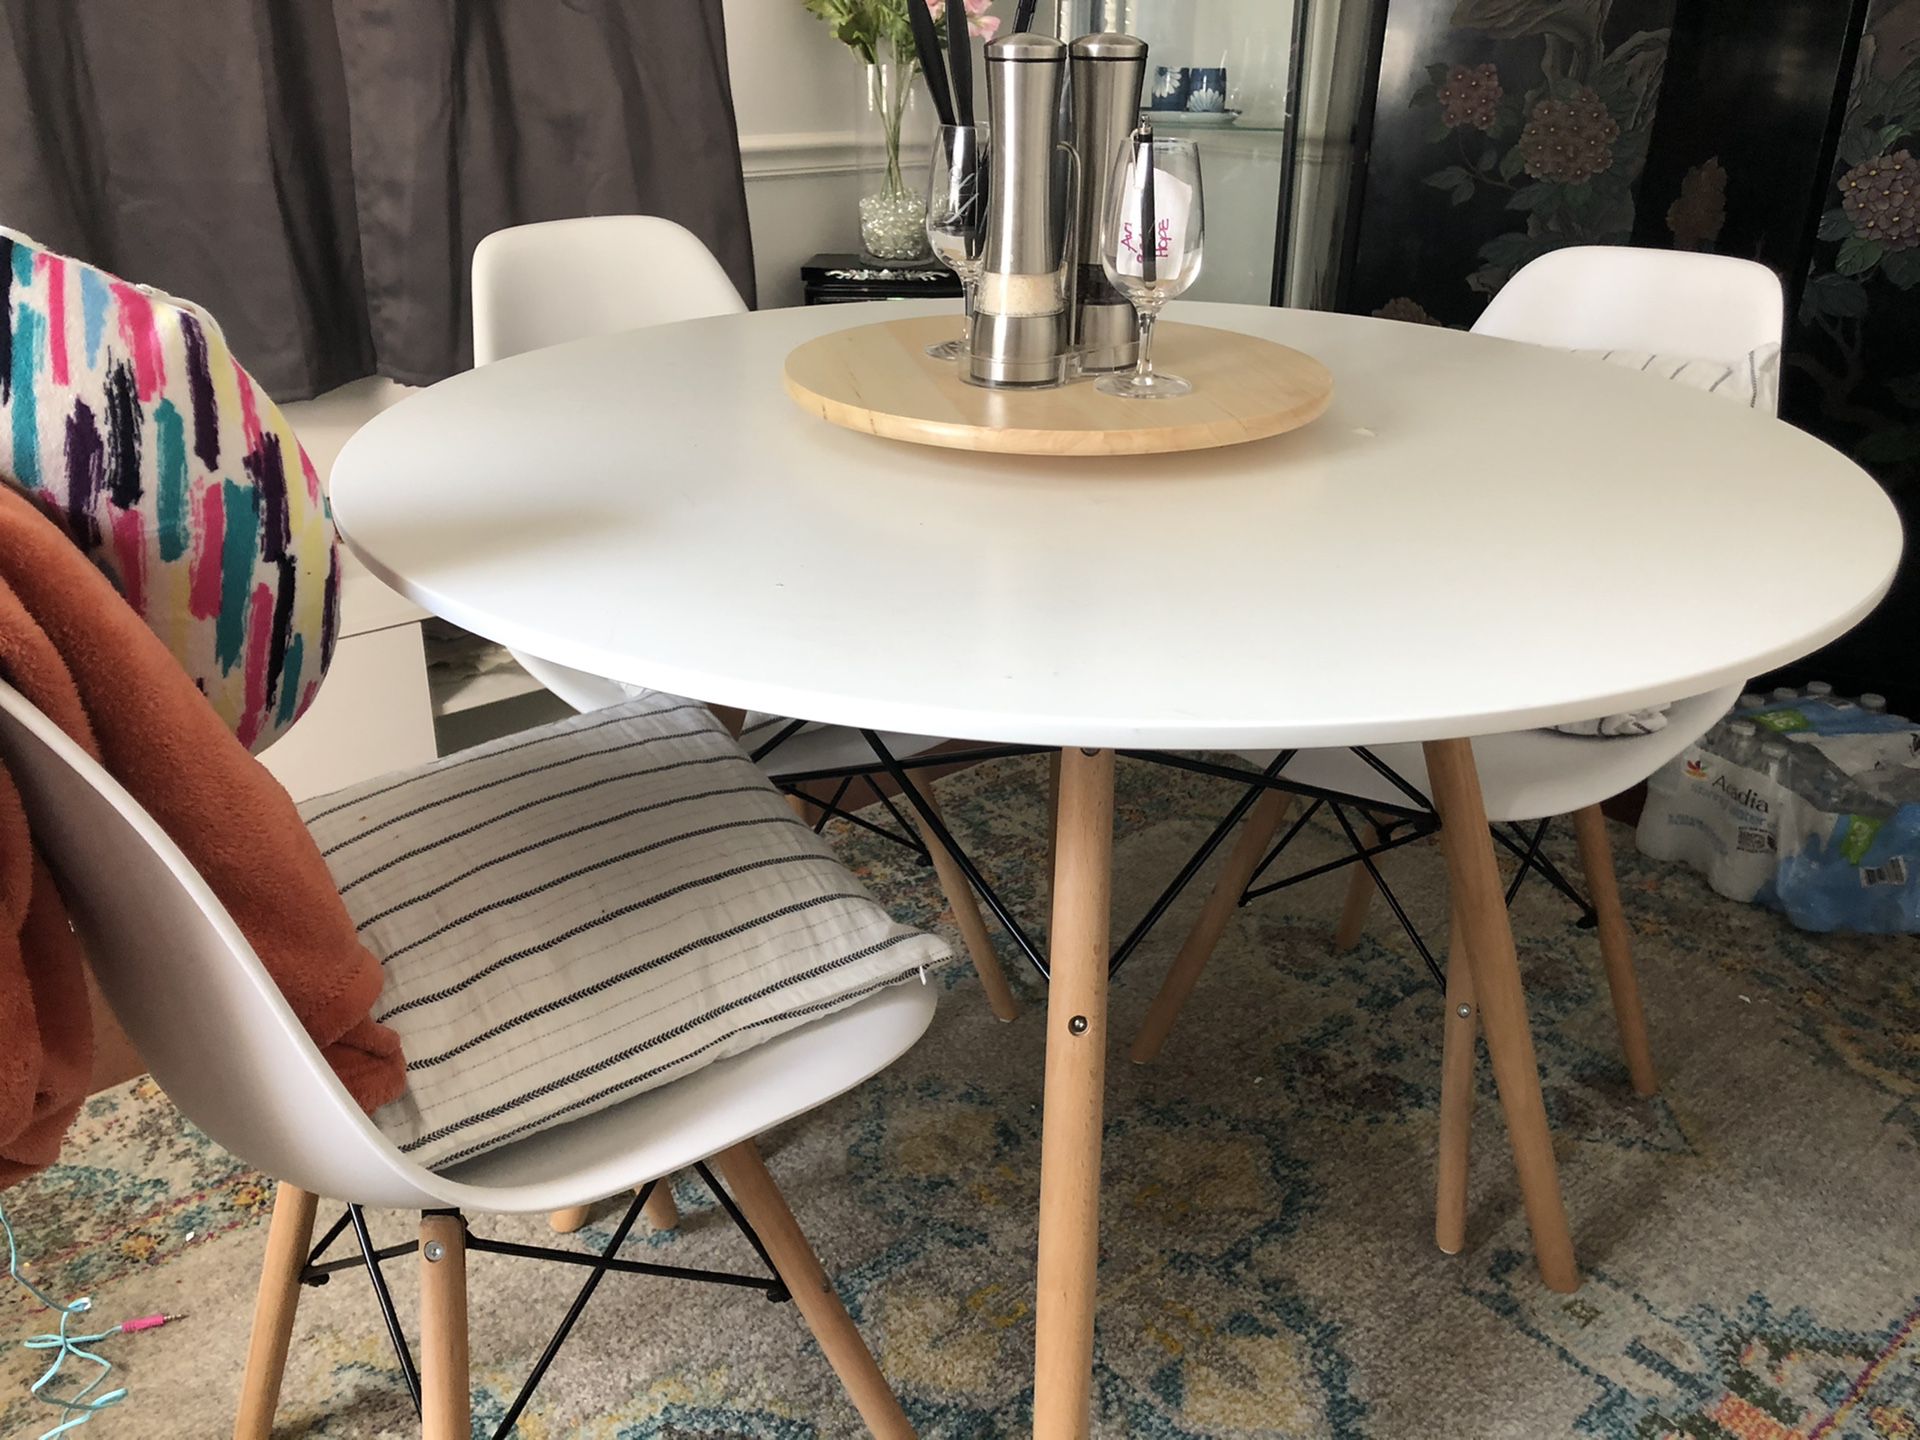 USED - Good condition dining table and 4 chairs.